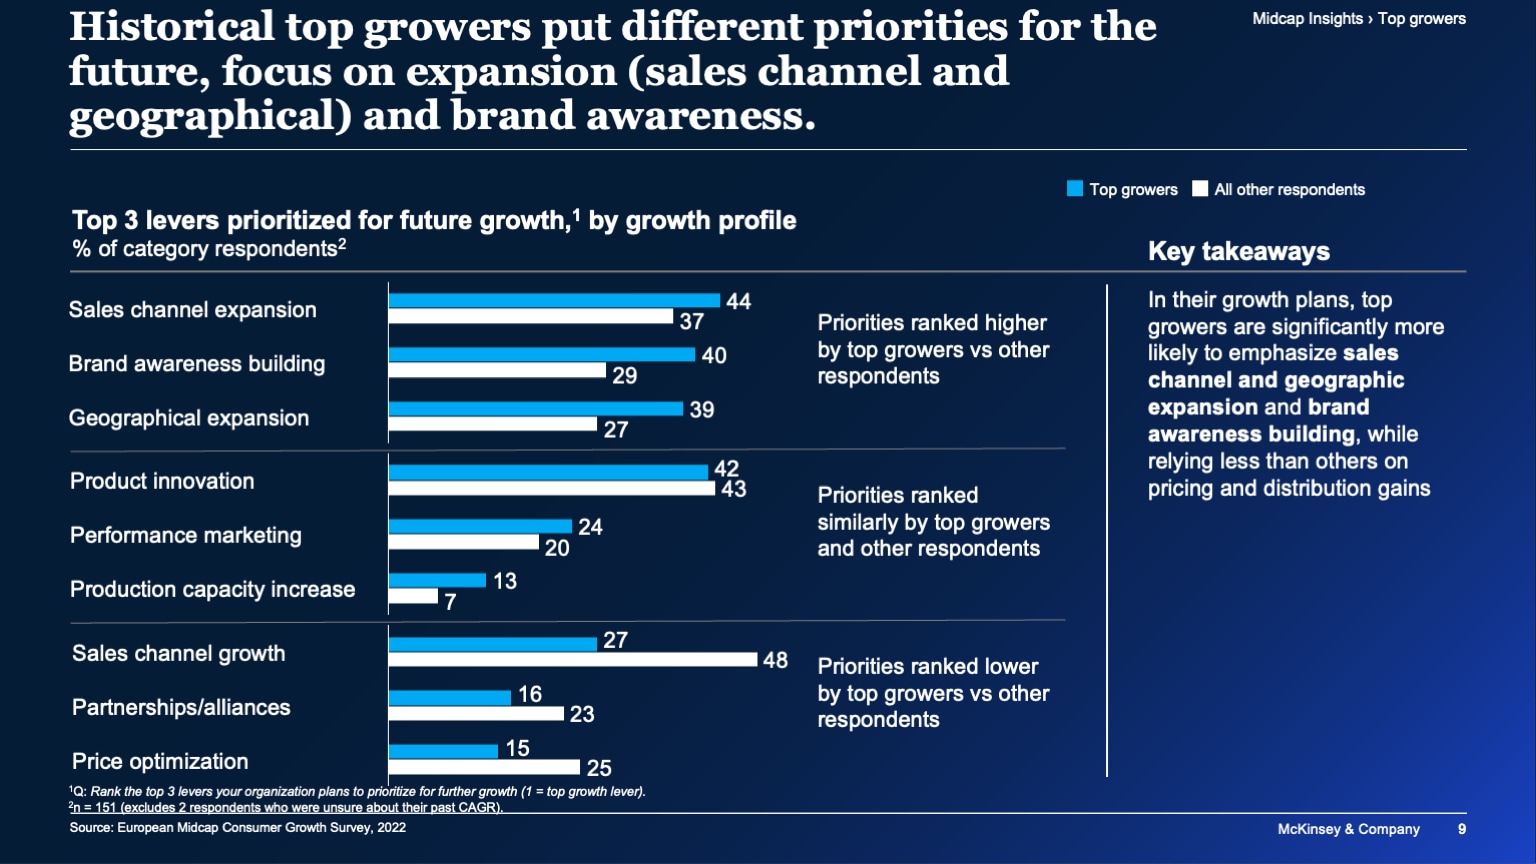 Historical top growers put different priorities for the future, focus on expansion (sales channel and geographical) and brand awareness.